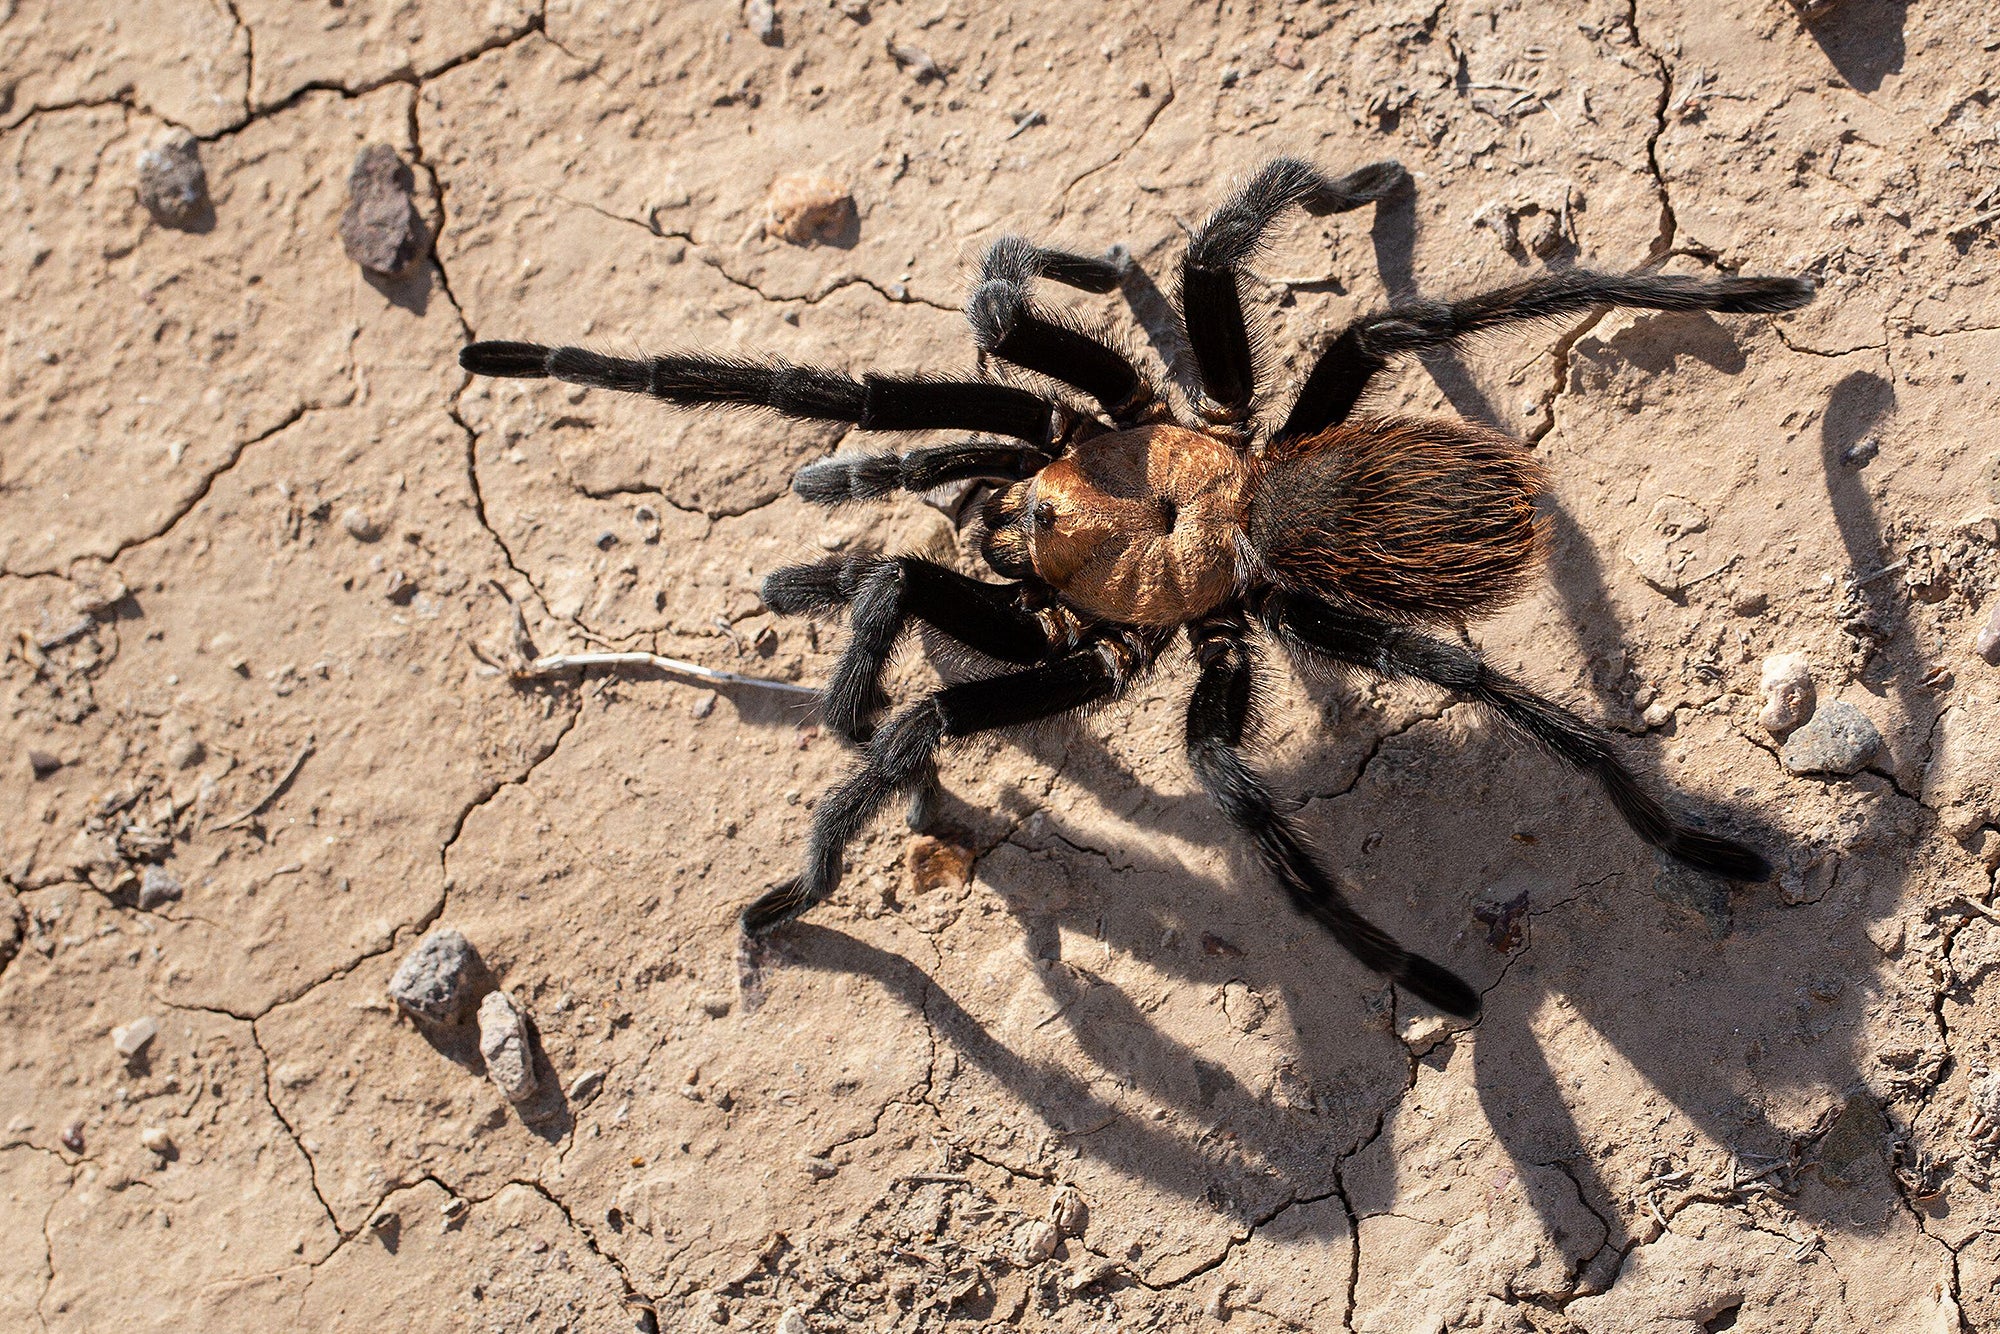 Eaten, Crushed or Starved; Male Tarantulas Trade Their Life to Impregnate a Mate